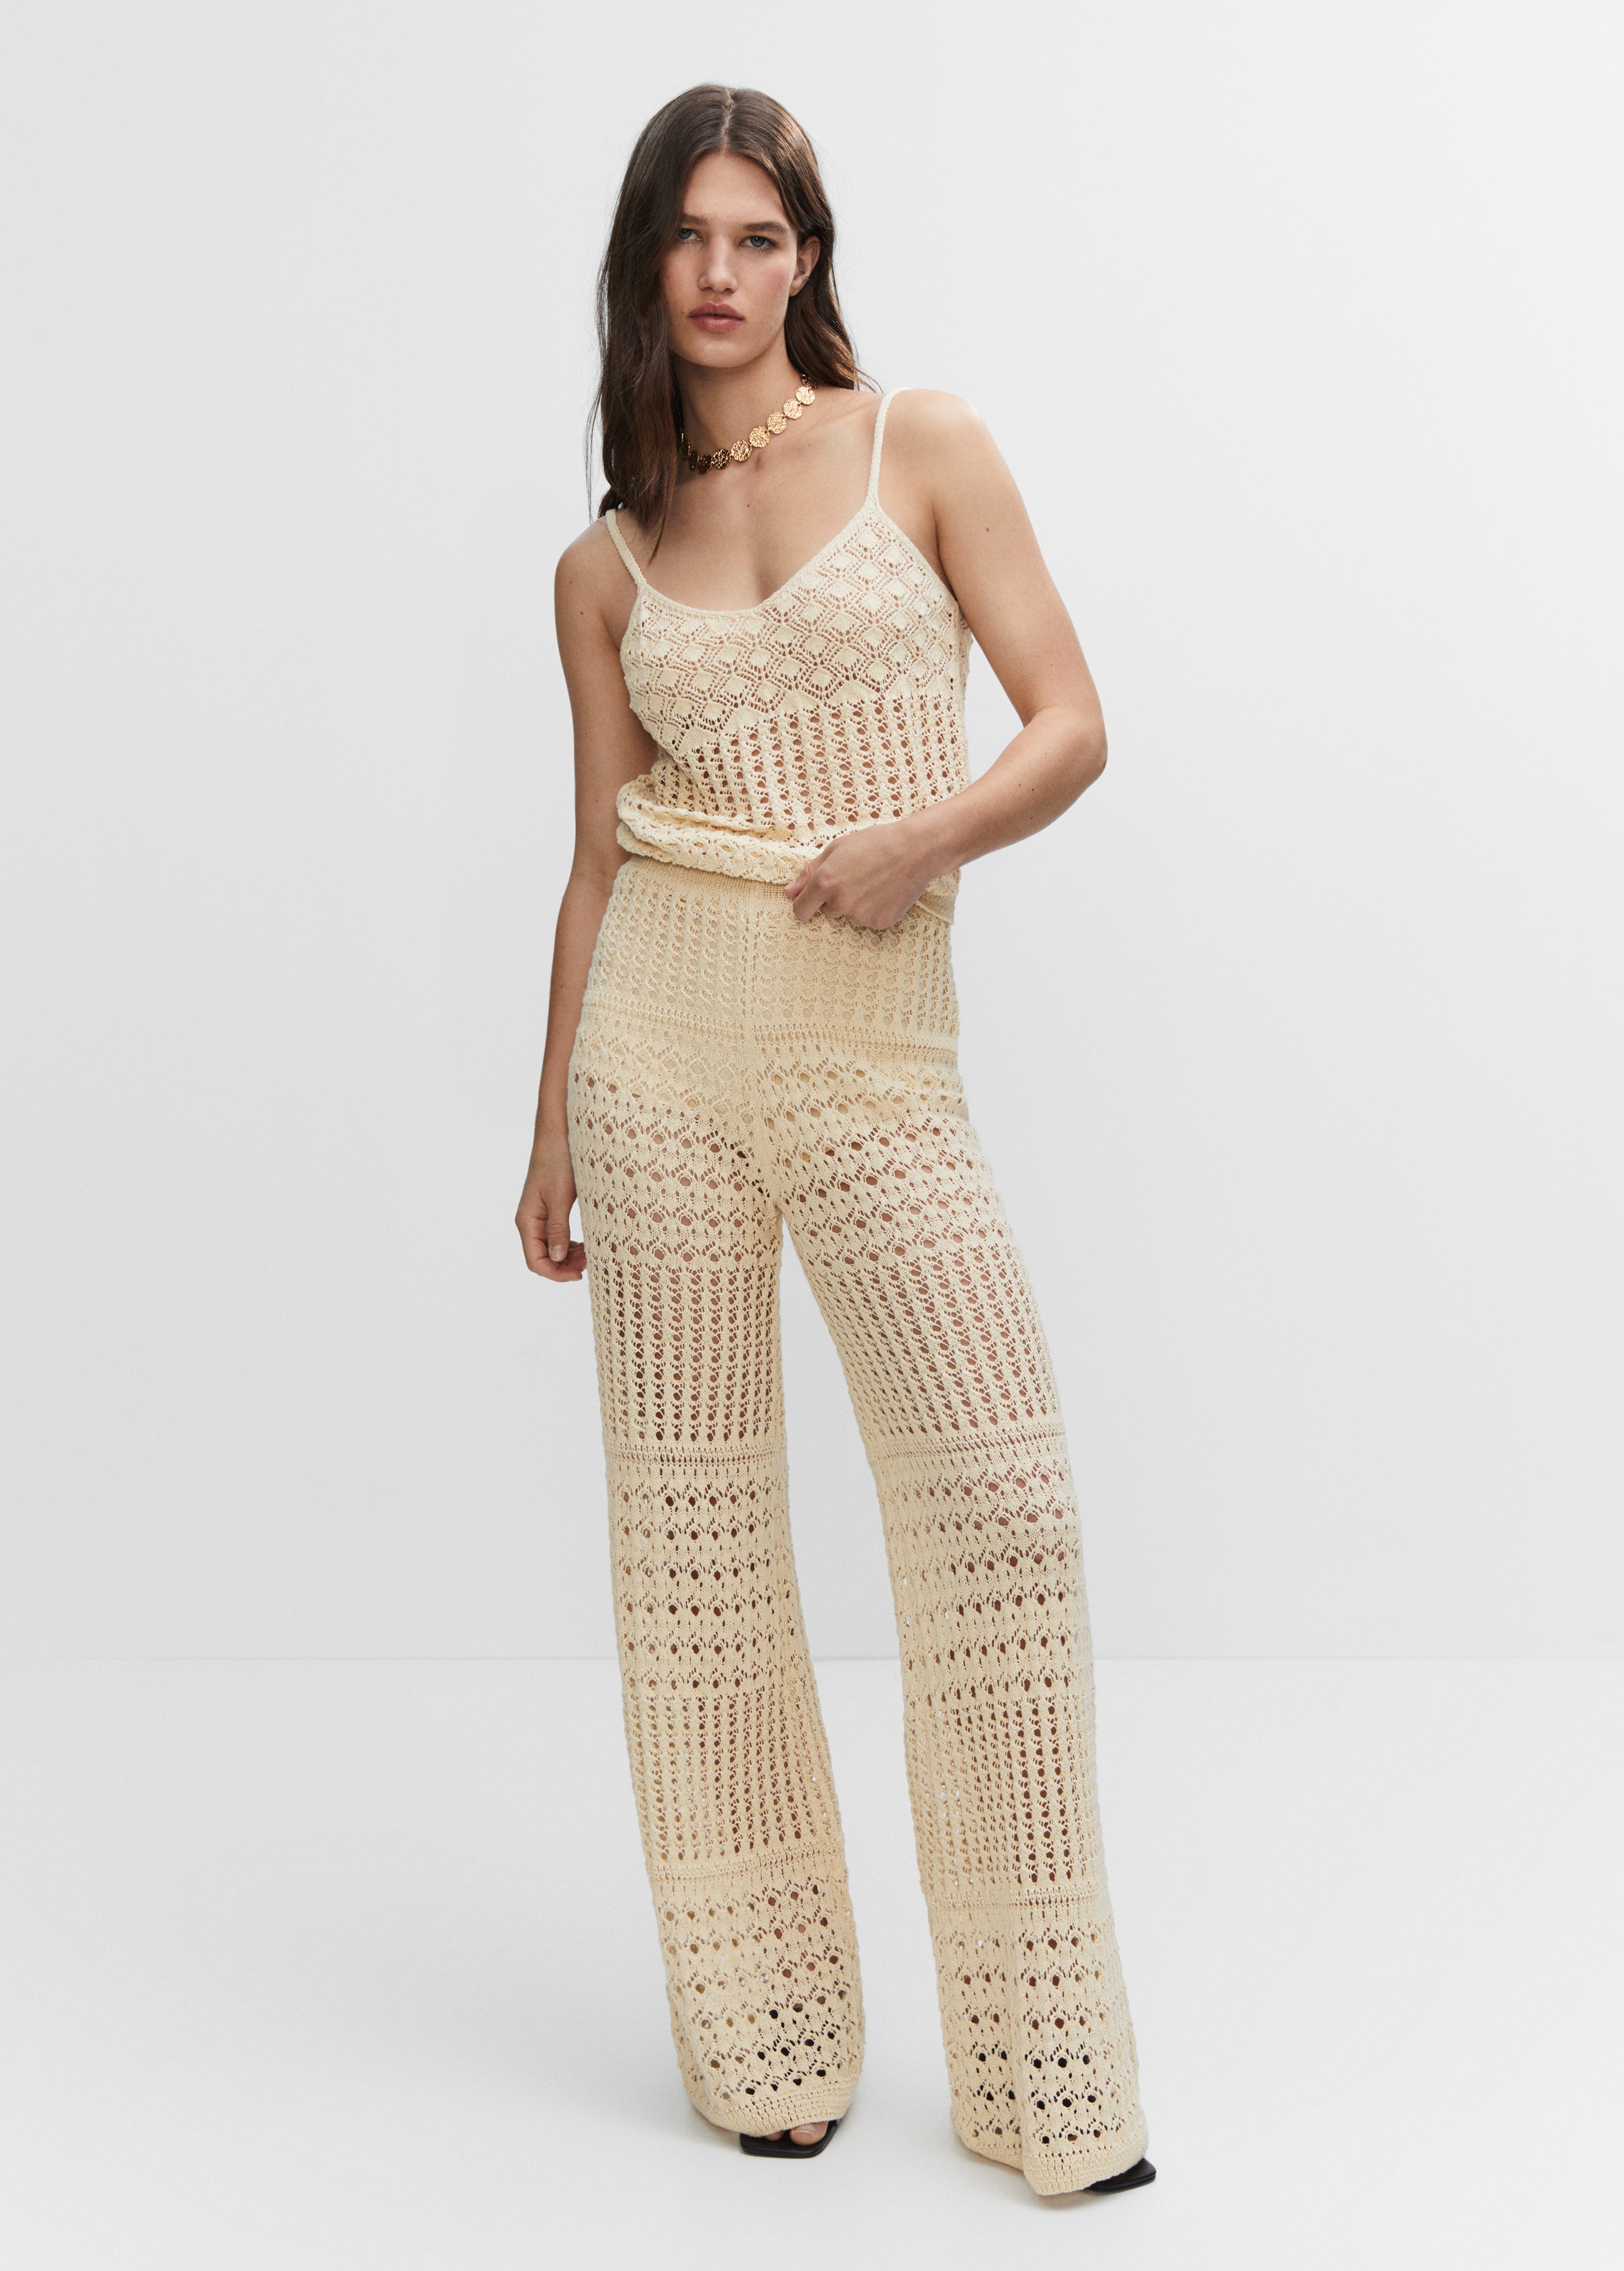 Openwork knitted palazzo pants - General plane